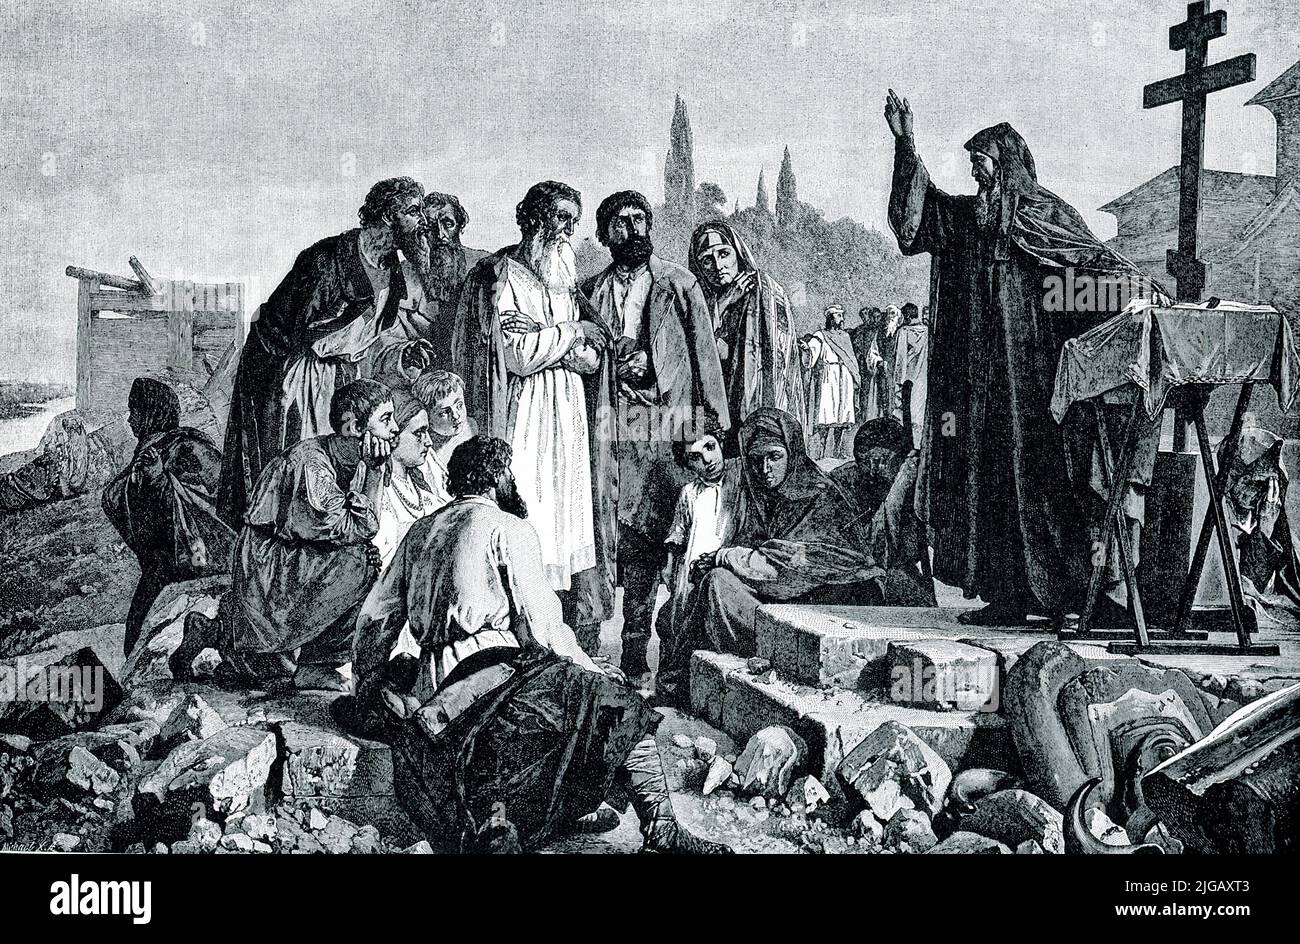 The 1906 caption reads ” SAINT ANDREW PREACHING CHRISTIANITY TO The RUSSIANS.—While historically we have no evidence that the Russians learned Christianity before the ninth century, they have a legend that Saint Andrew, one of the seventy-two apostles of Christ, visited their land in the first Christian century and was gladly welcomed by the natives. He taught them the rudiments of the faith, and although most of these were gradually forgotten, the natives always continued to use the sign of the cross and to look upon the symbol with deep reverence. Oddly enough, their ancient crucifix had, as Stock Photo